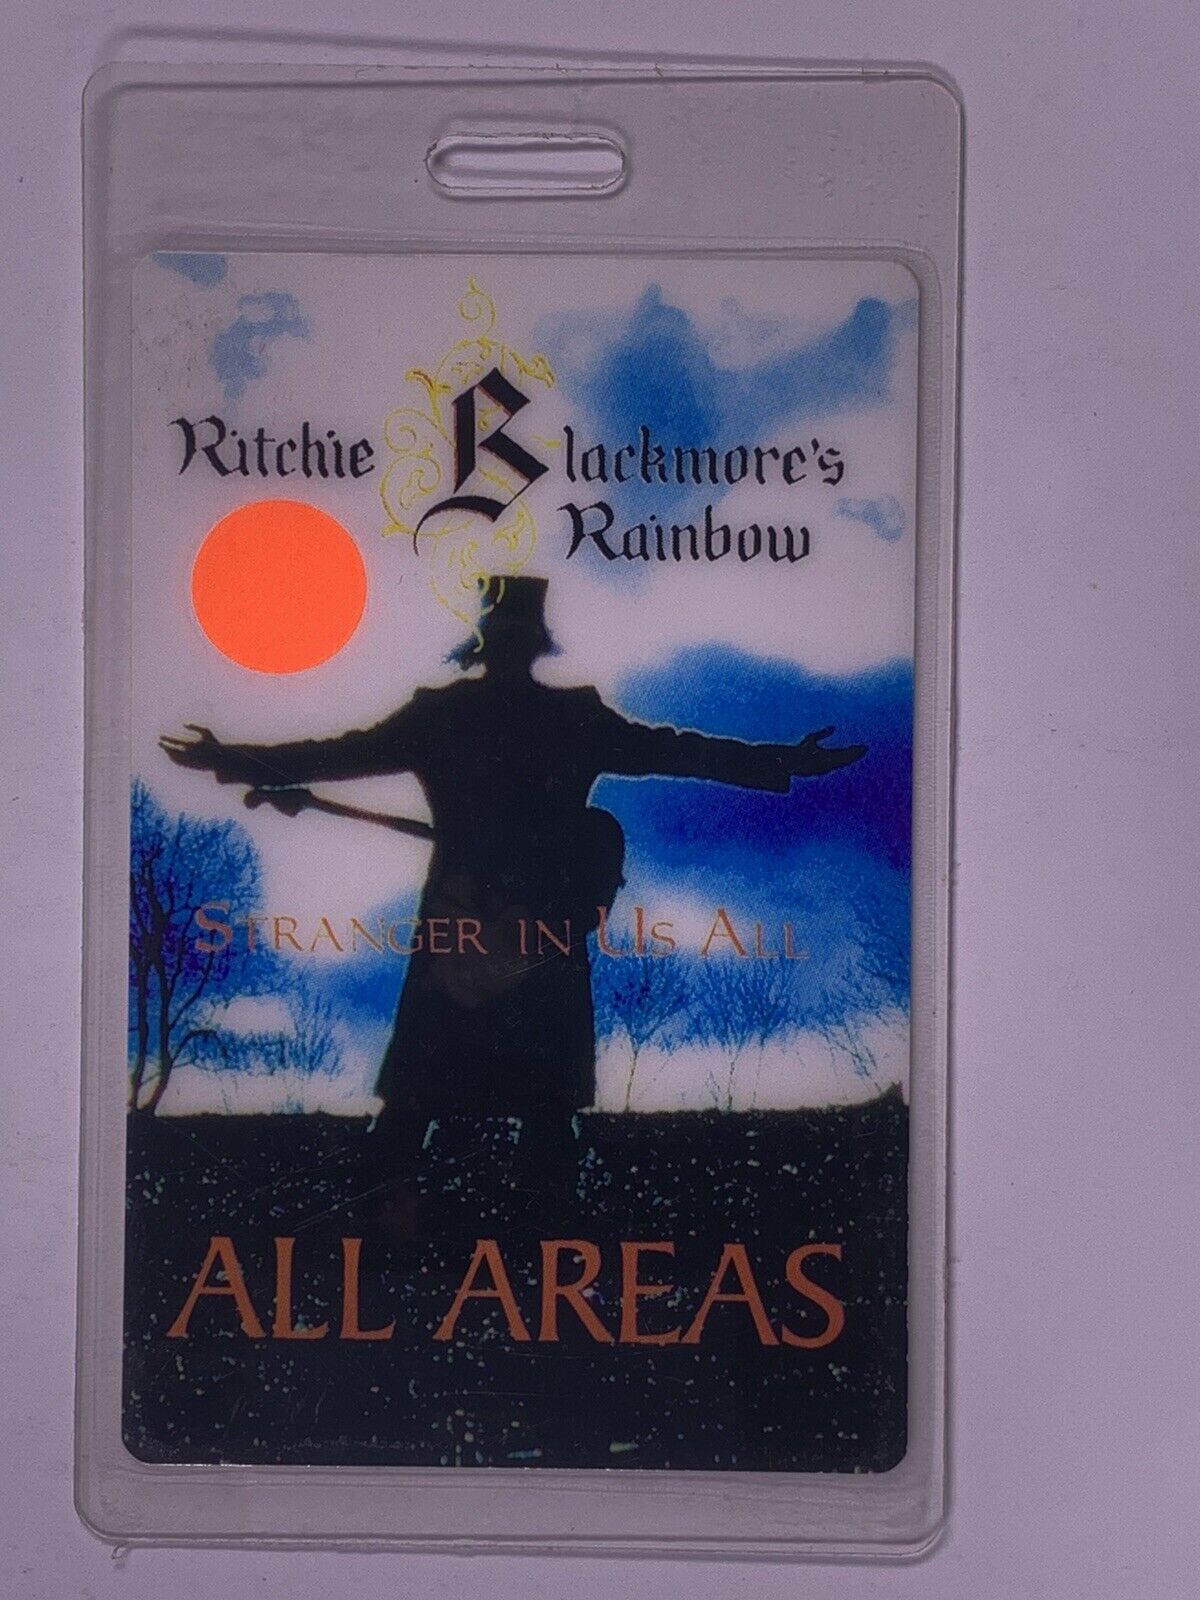 Ritchie Blackmore Pass Deep Purple Rainbow All Area Stranger In Us All Tour 1995